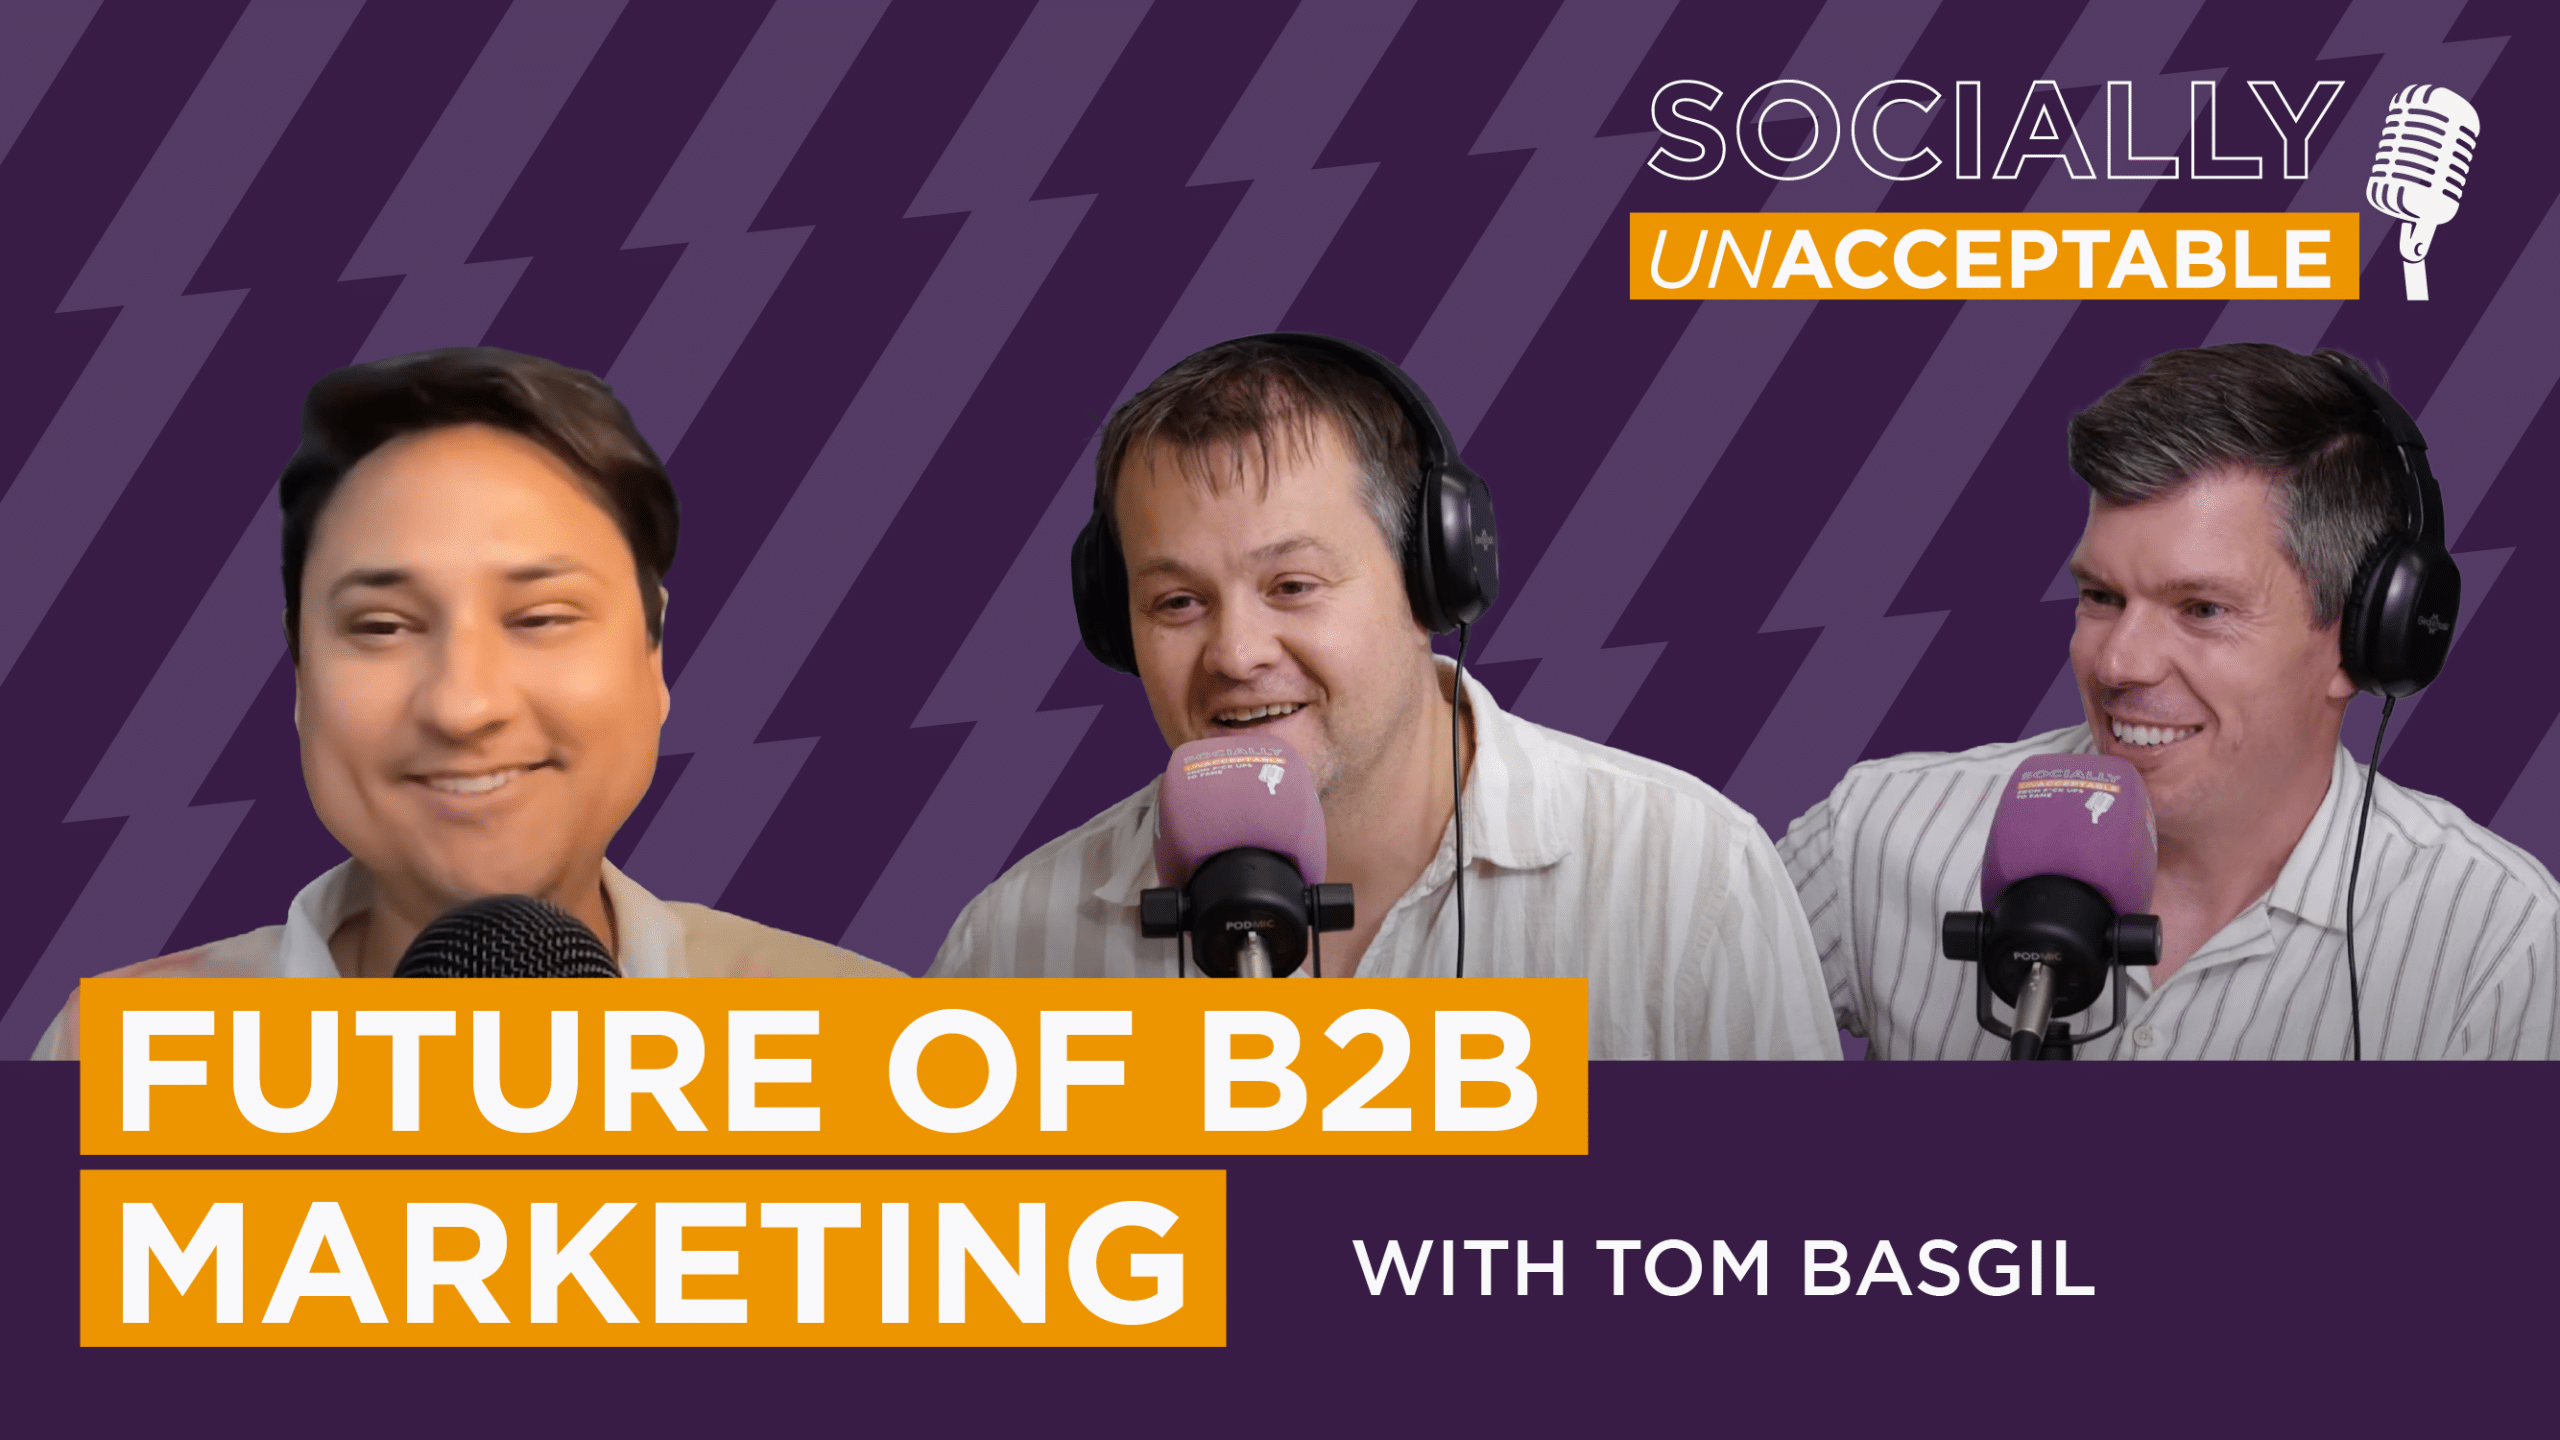 Socially Unacceptable – Tom Basgil Unveils the Future of B2B Marketing: Trends, Strategies and More